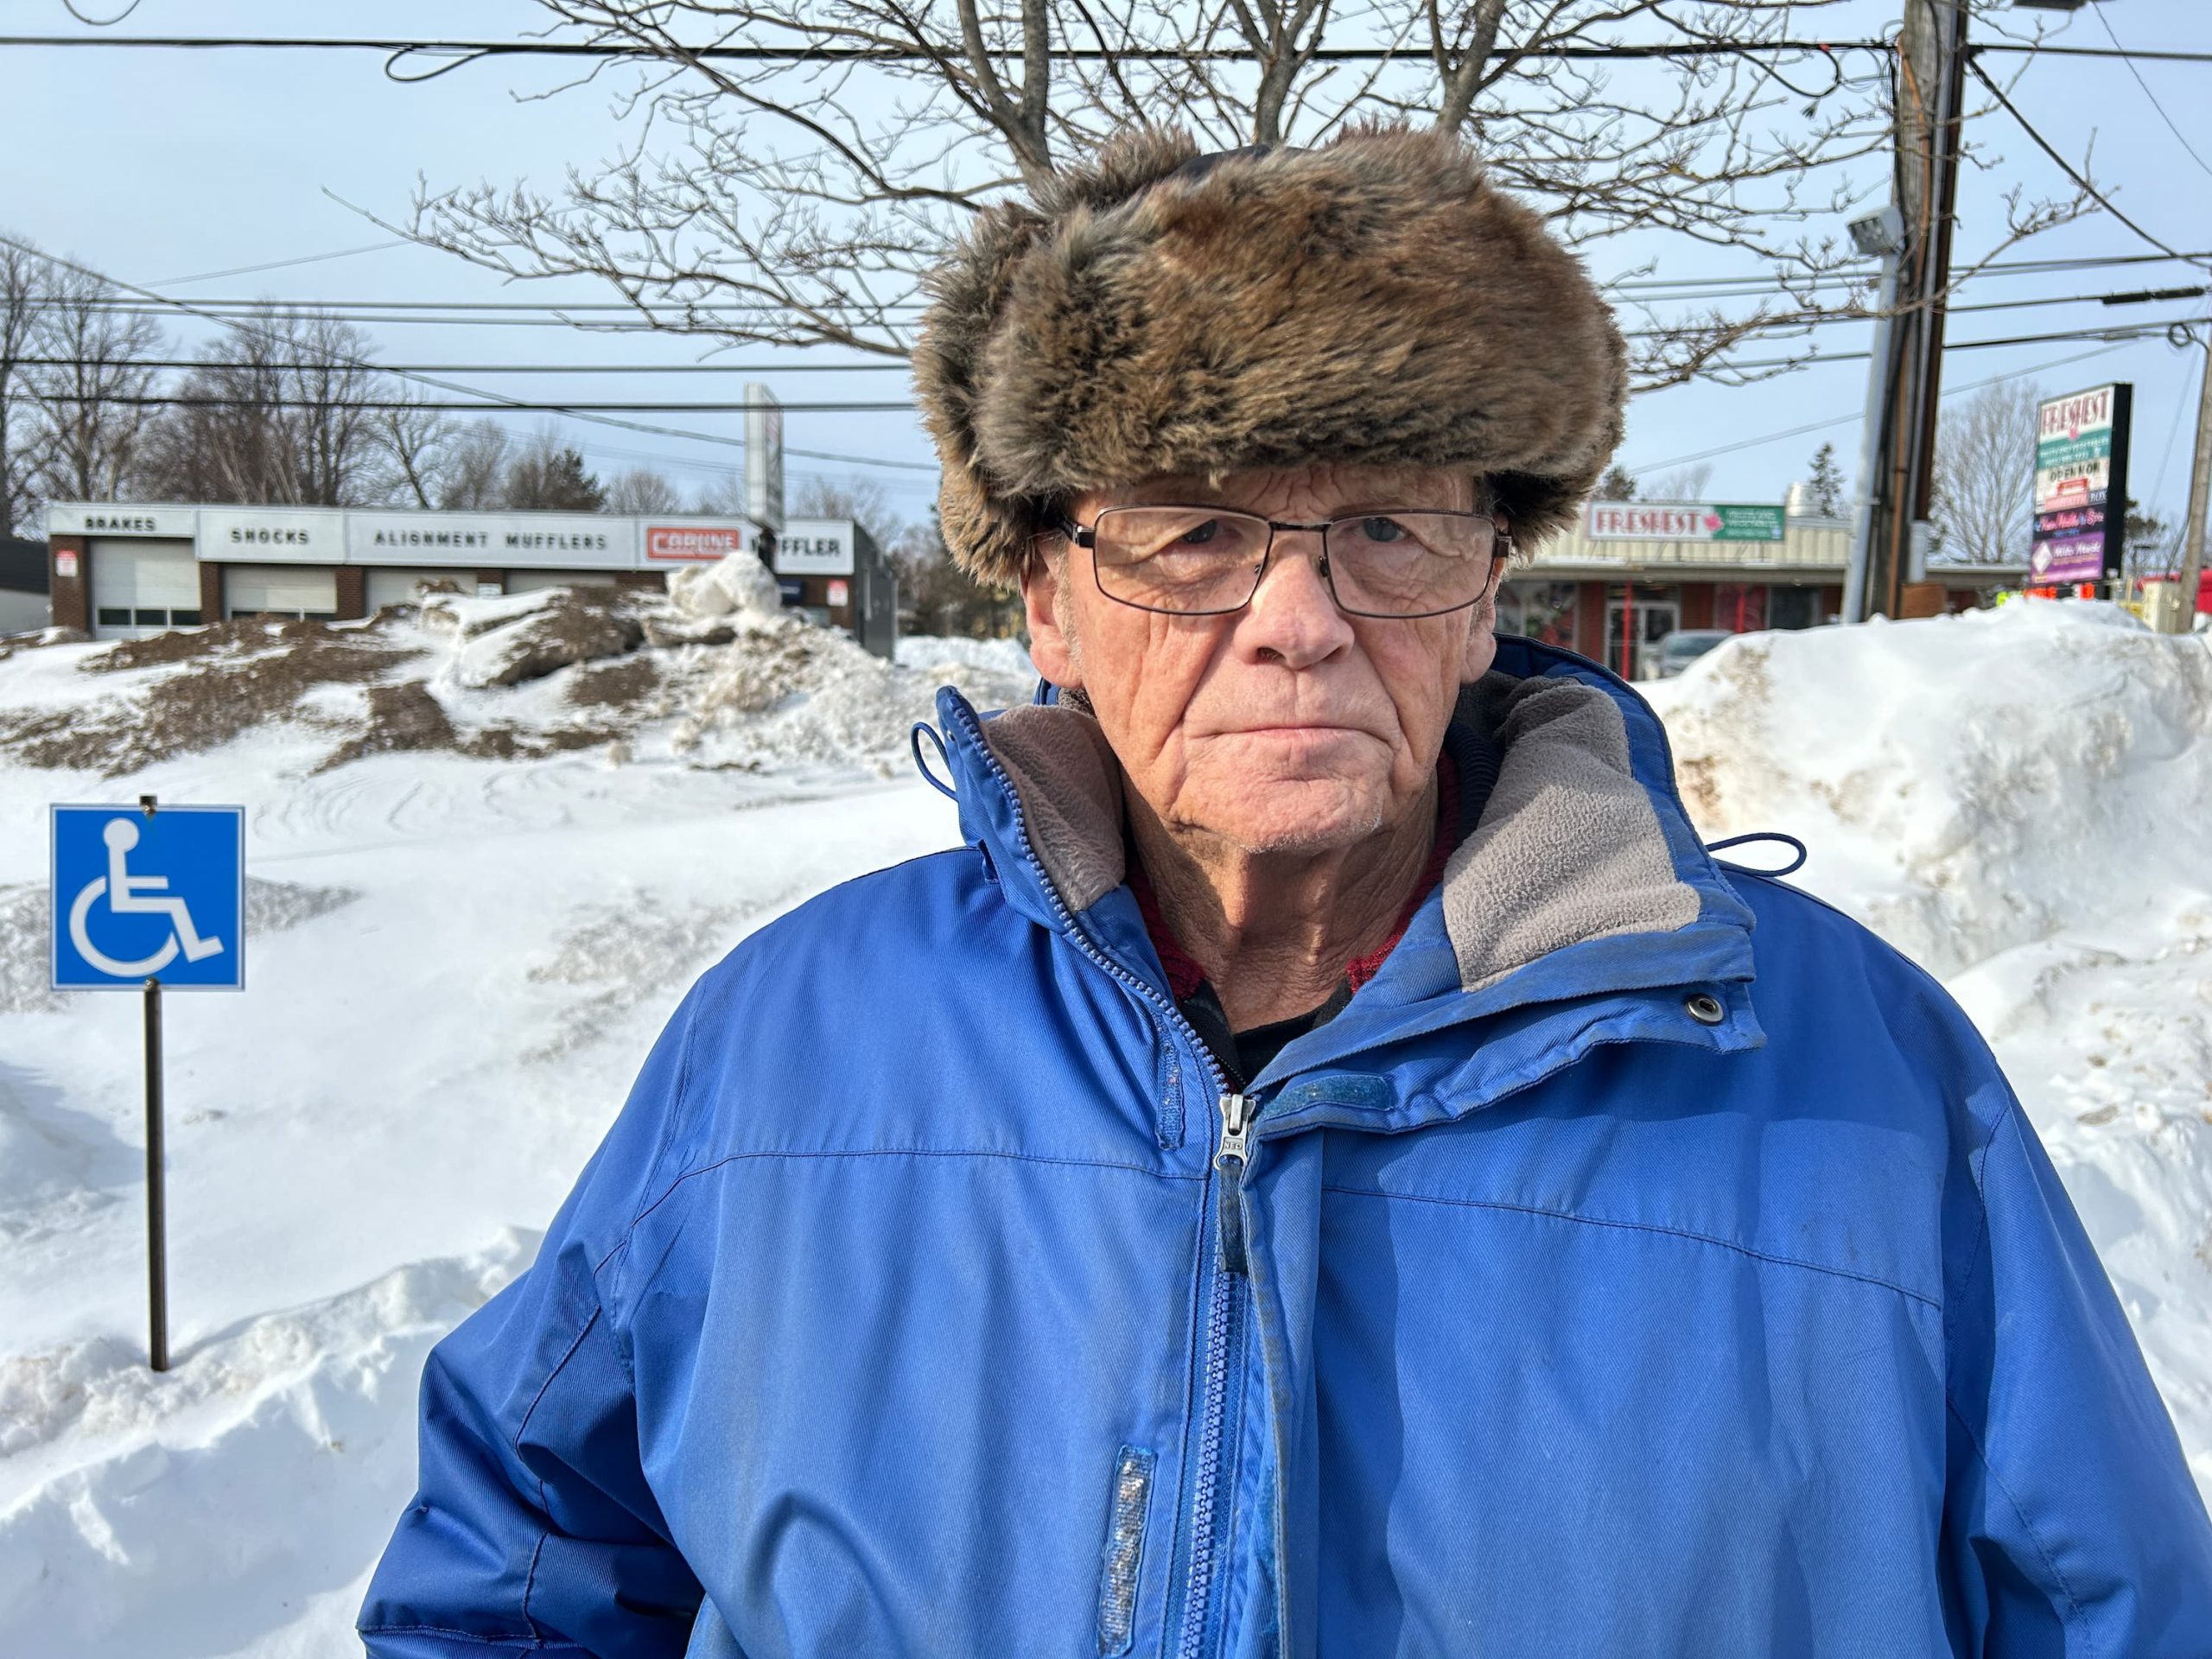 This P.E.I. senior has no fixed address. He says there aren’t enough services for people like him [Video]